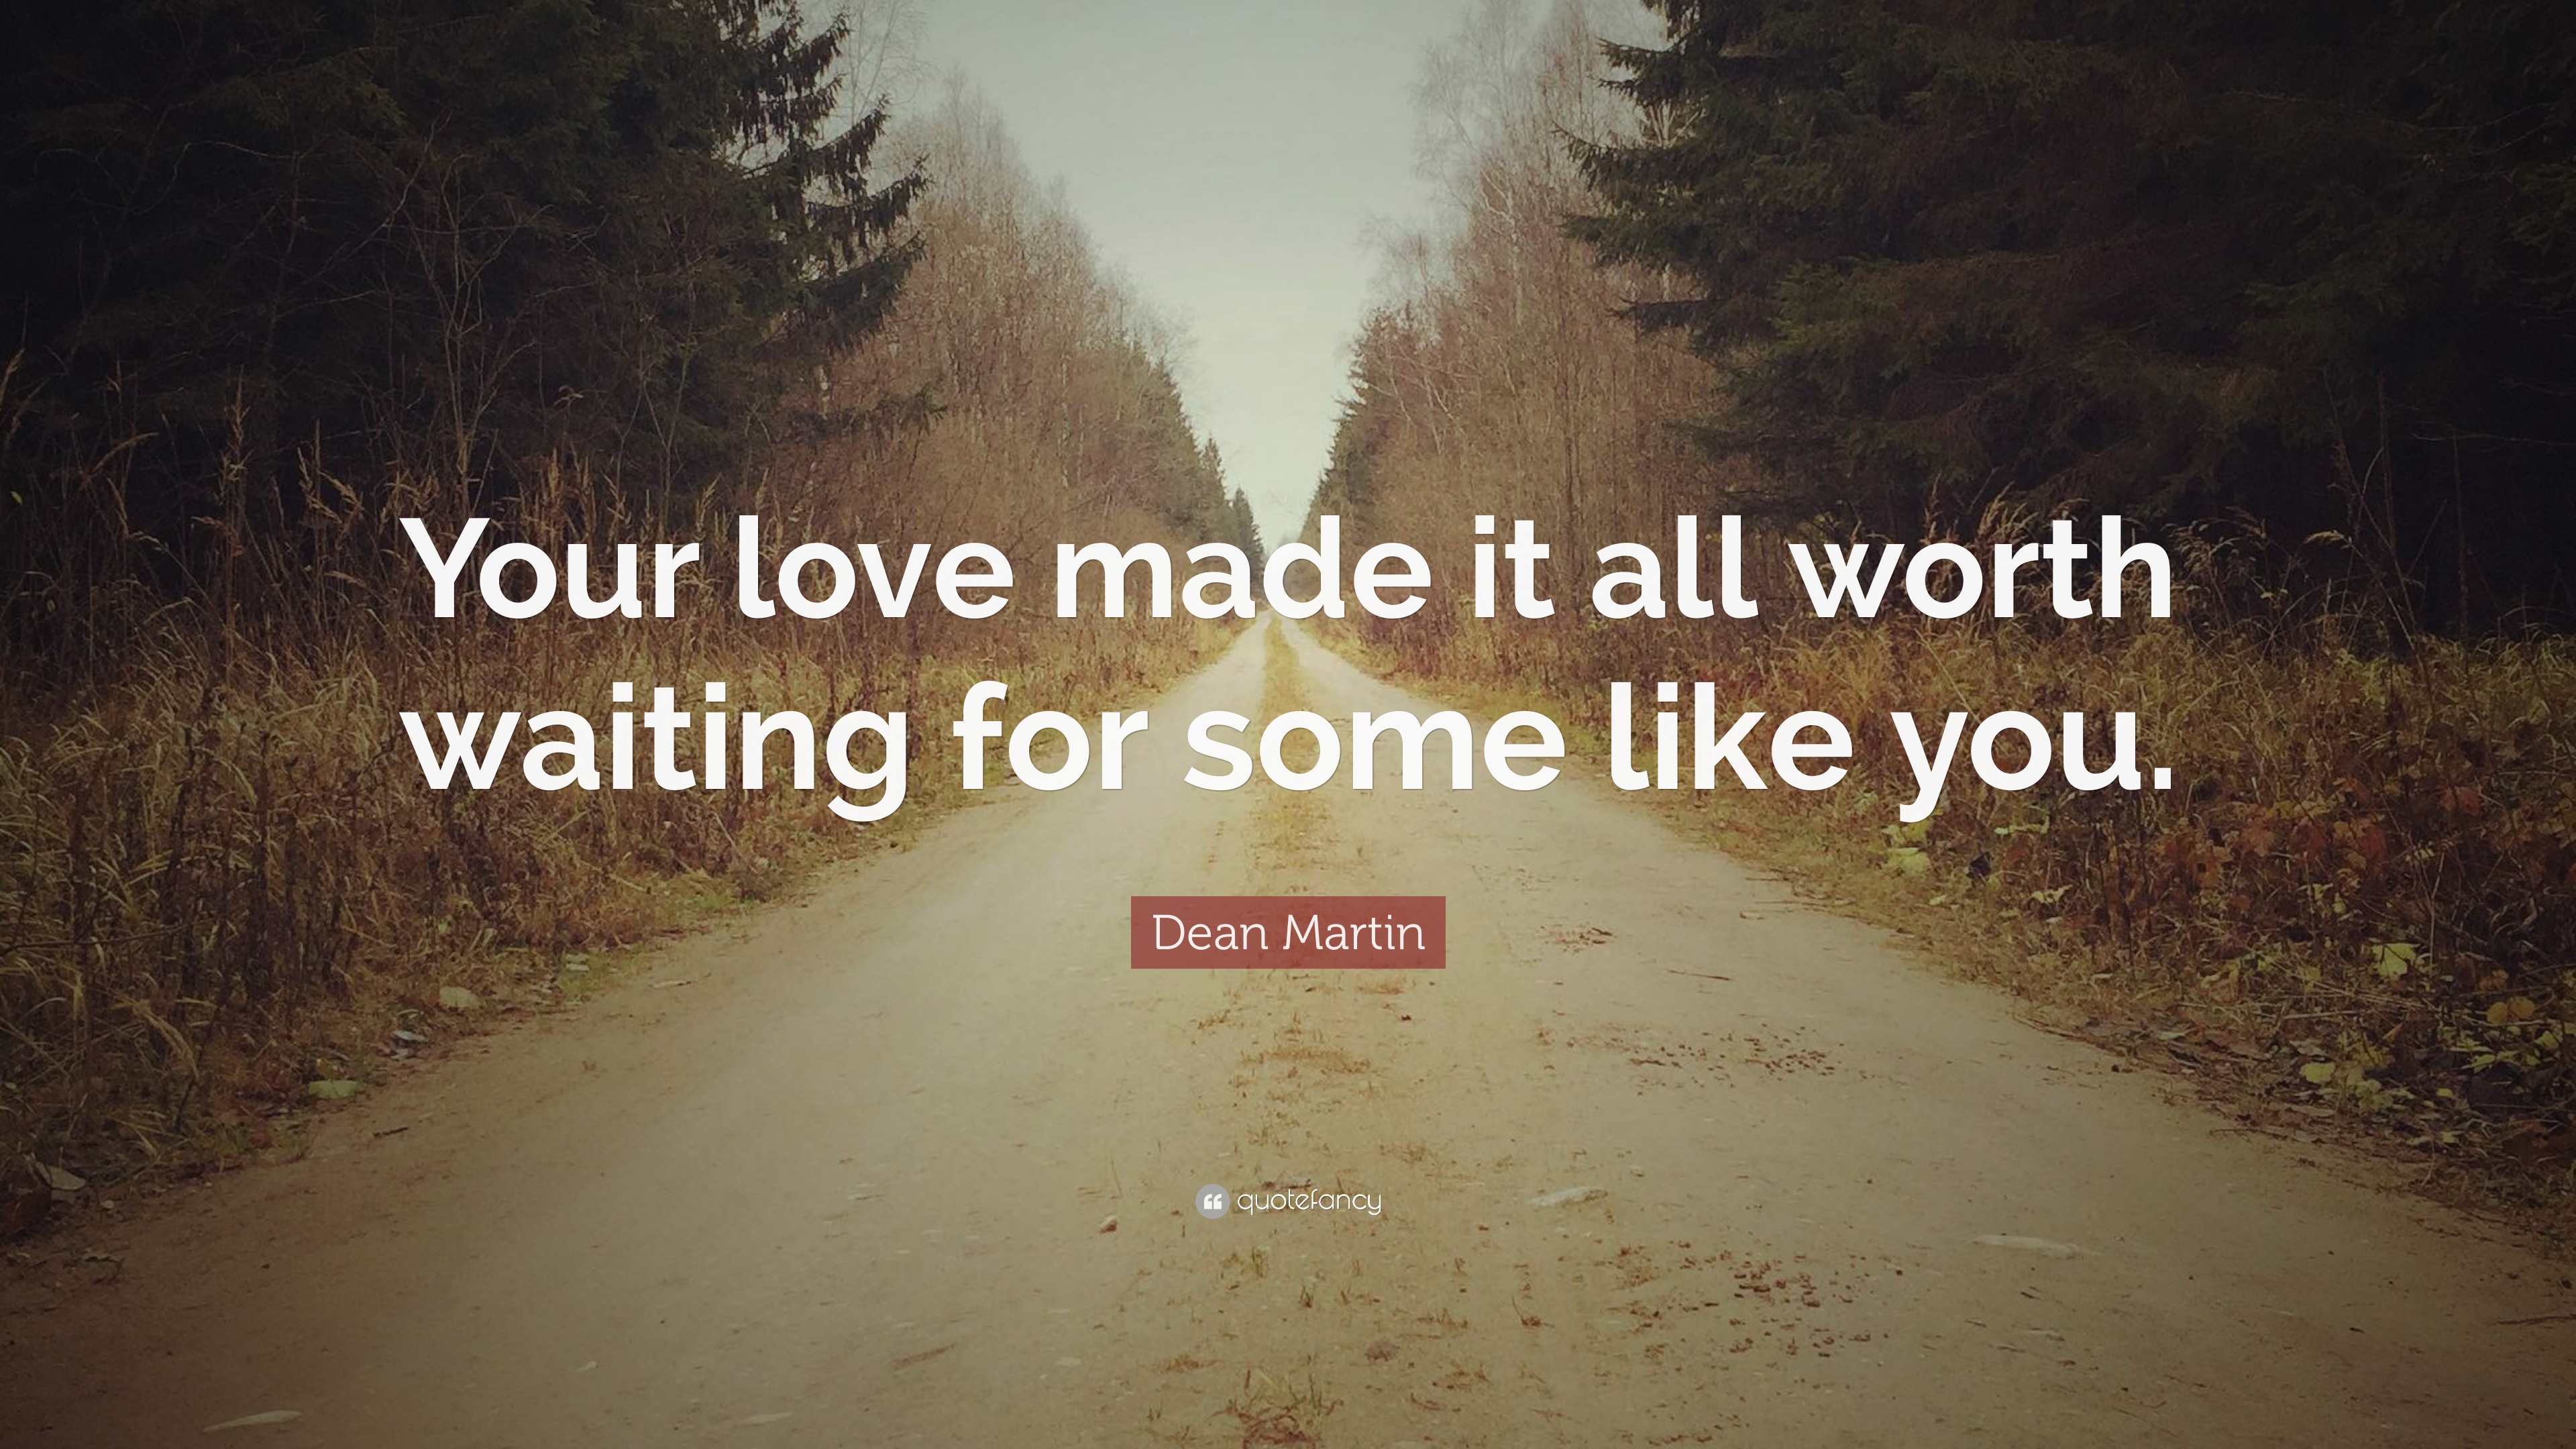 Dean Martin Quote: “Your love made it all worth waiting for some